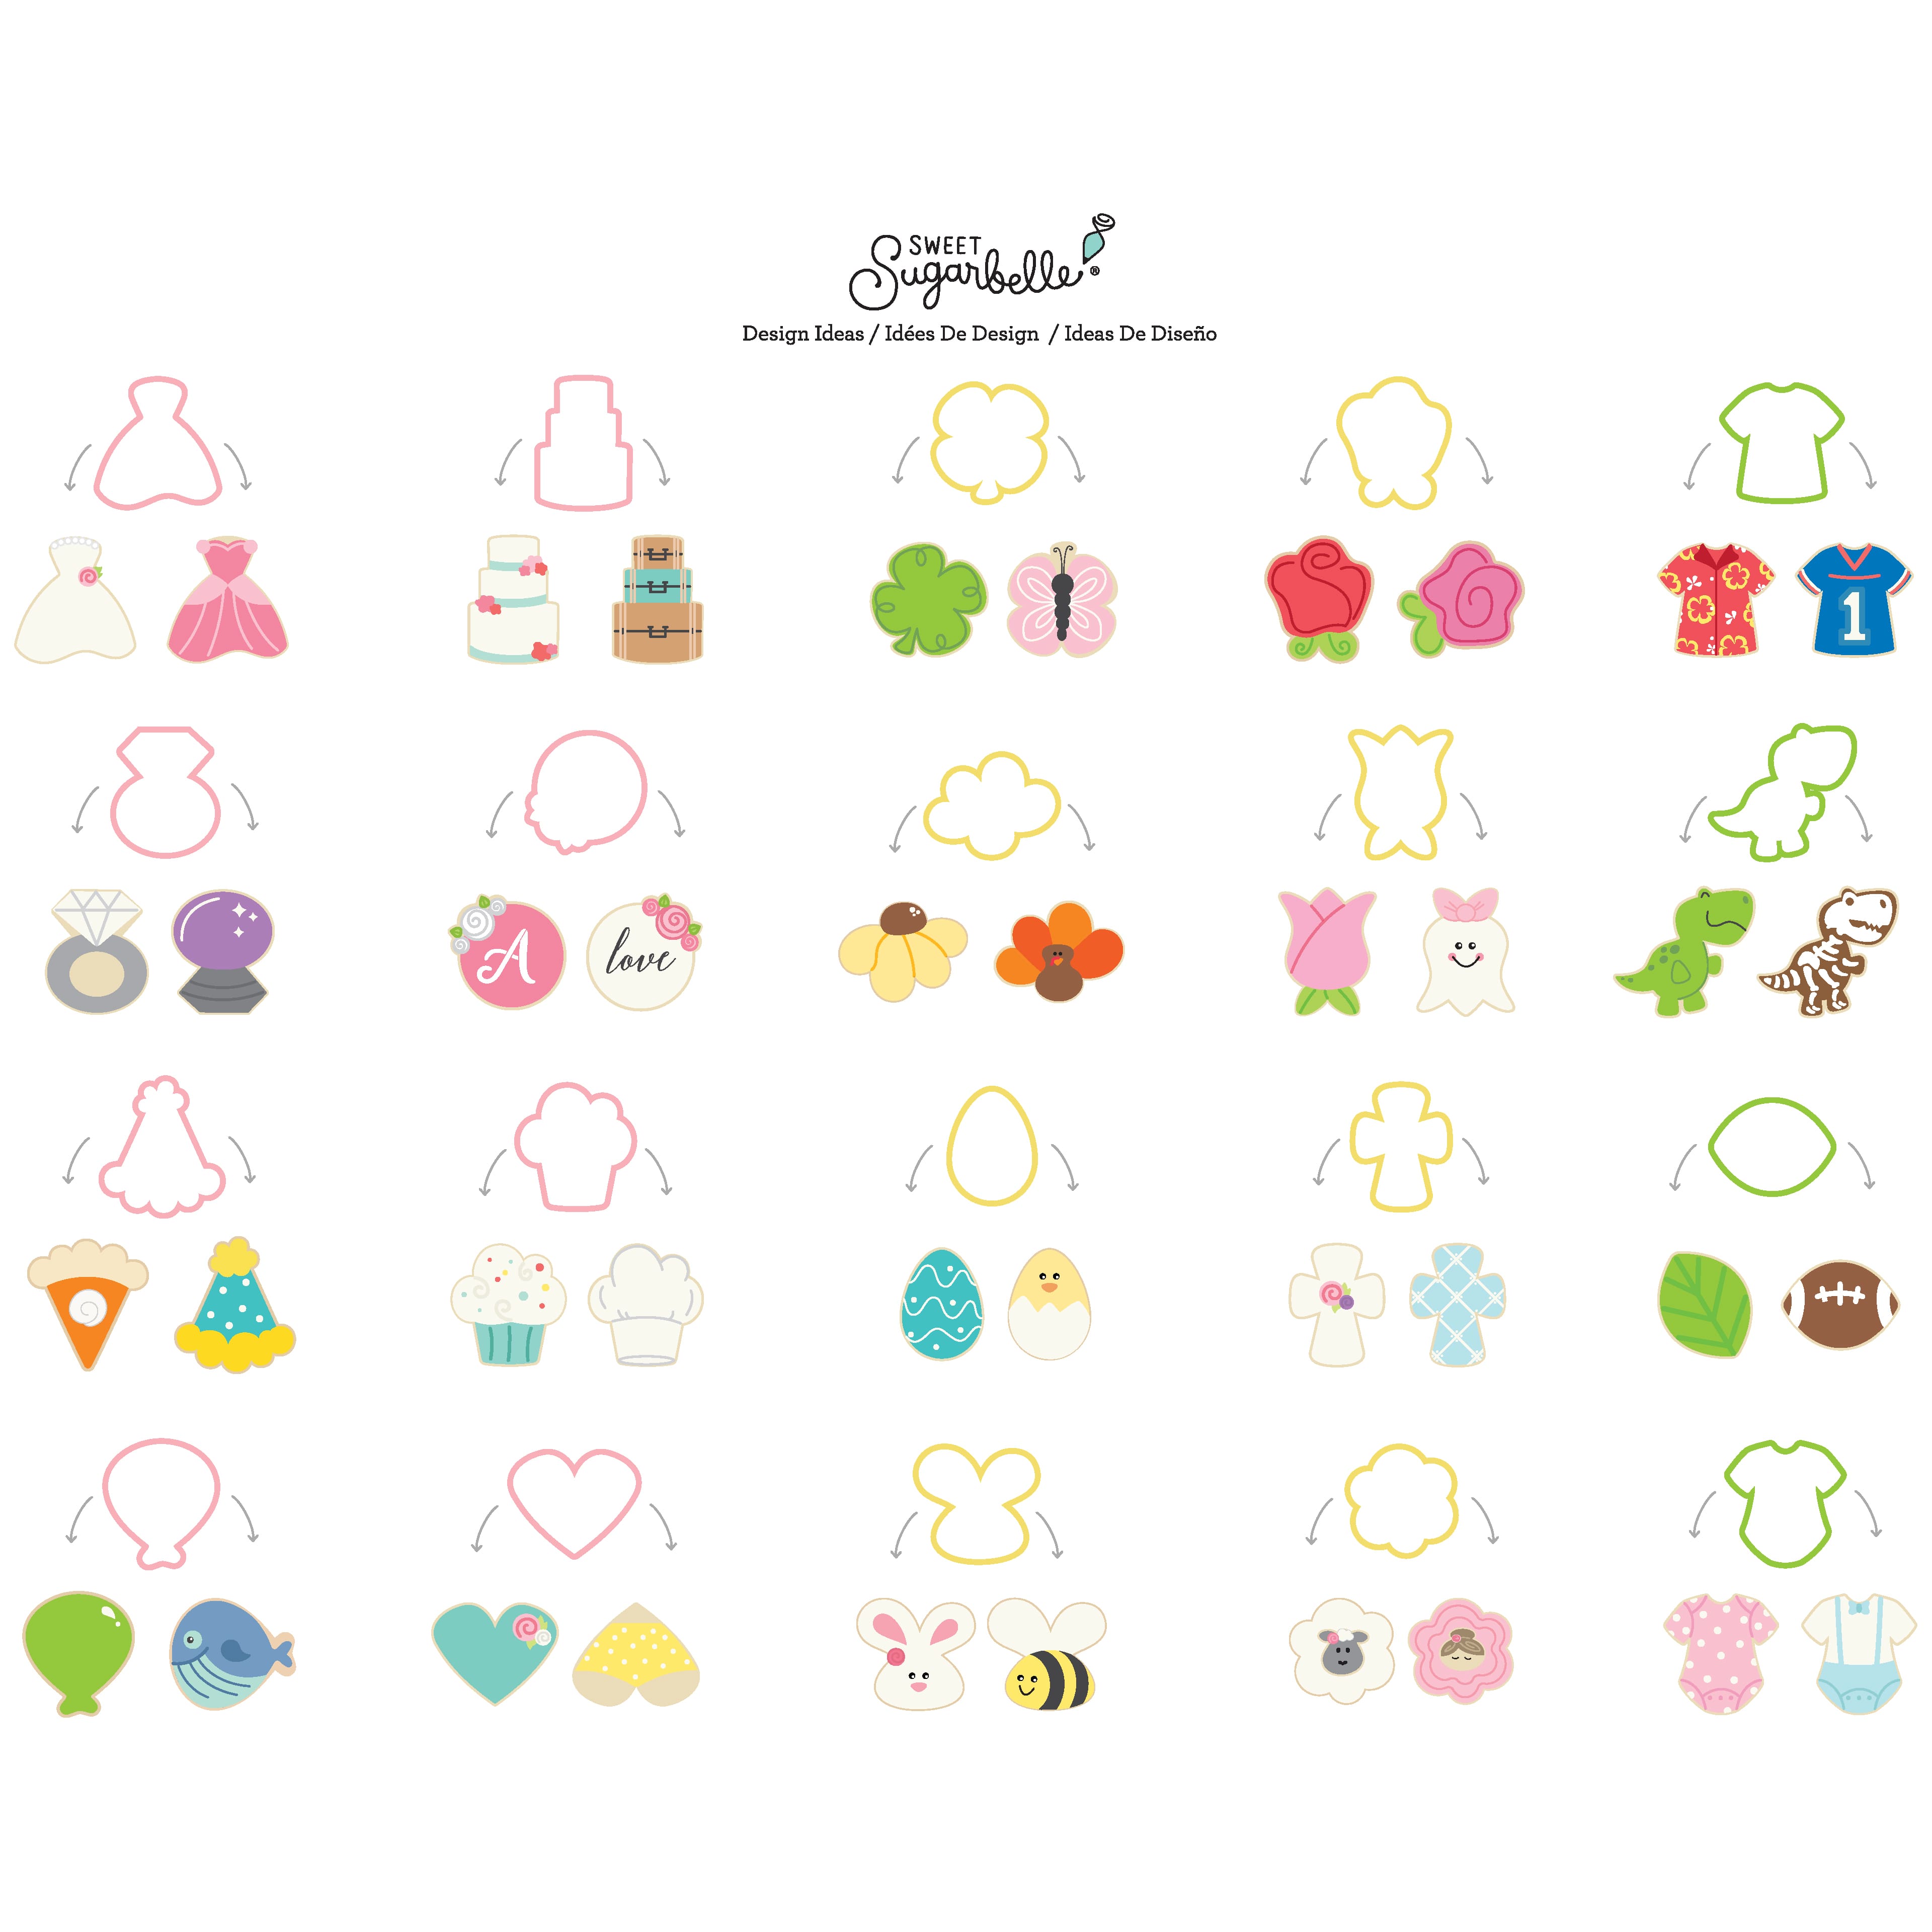 Shop Sweet Sugarbelle Mini Cookie Cutter Set of 40: Shapeshifter 1